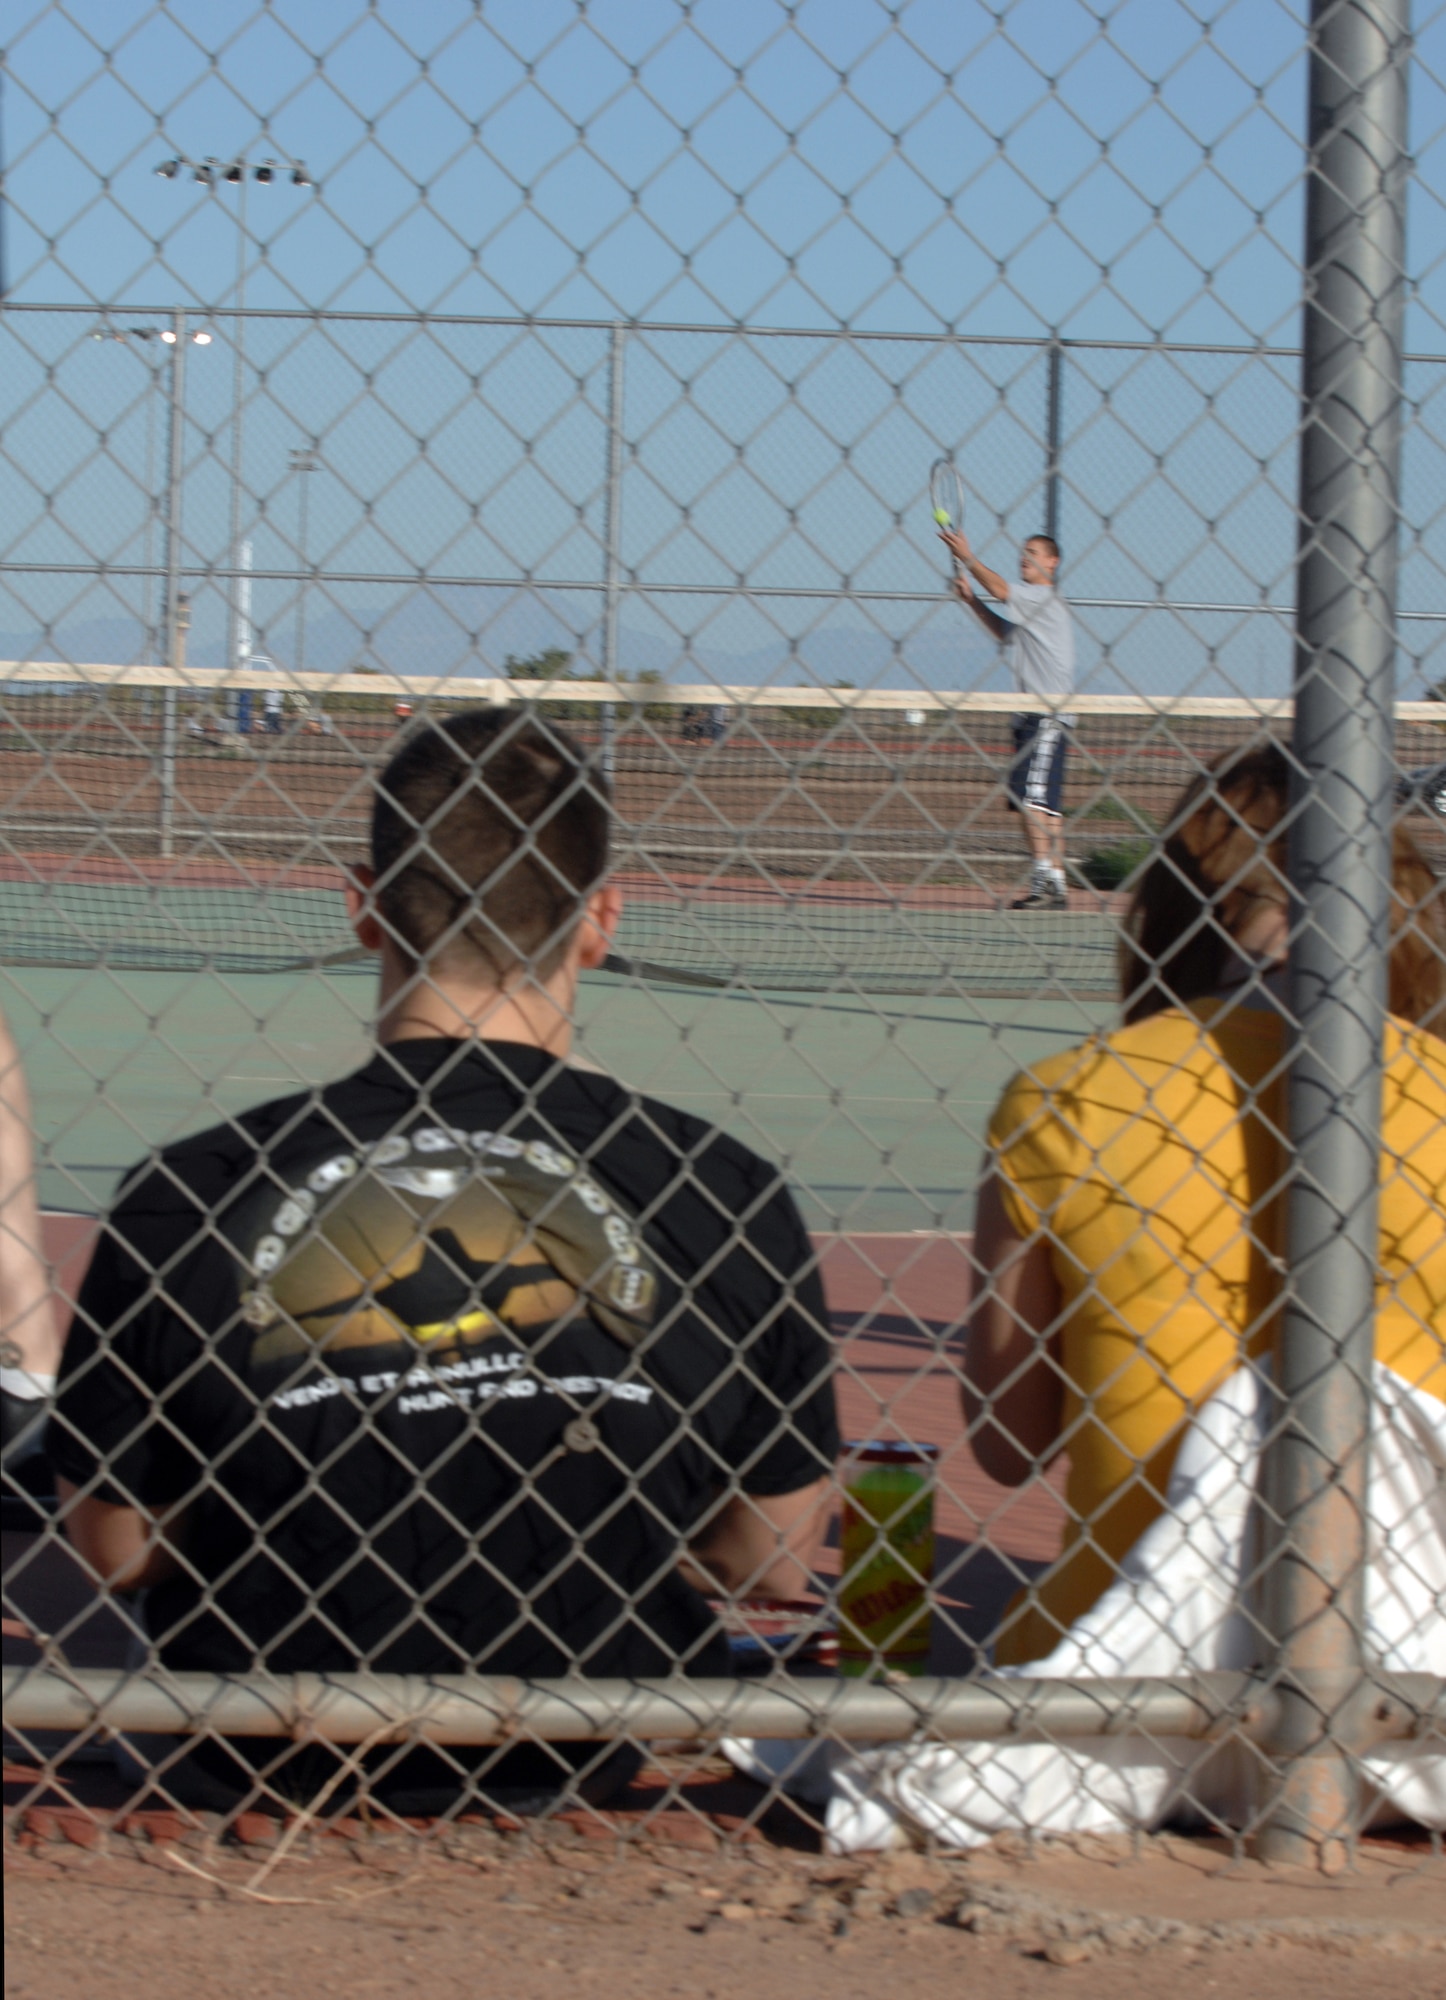 Spectators watch the game of tennis between Airman 1st Class Miles Mendez, 49th Materiel Maintenance Group, and Capt. Chris Rosales, 49th Logistics Readiness Squadron, during Sports Day at the Fitness and Sports Center at Holloman Air Force Base, N.M., October 10. More than 20 tennis players participated in the competition. (U.S. Air Force photo/Airman Sondra M. Escutia)